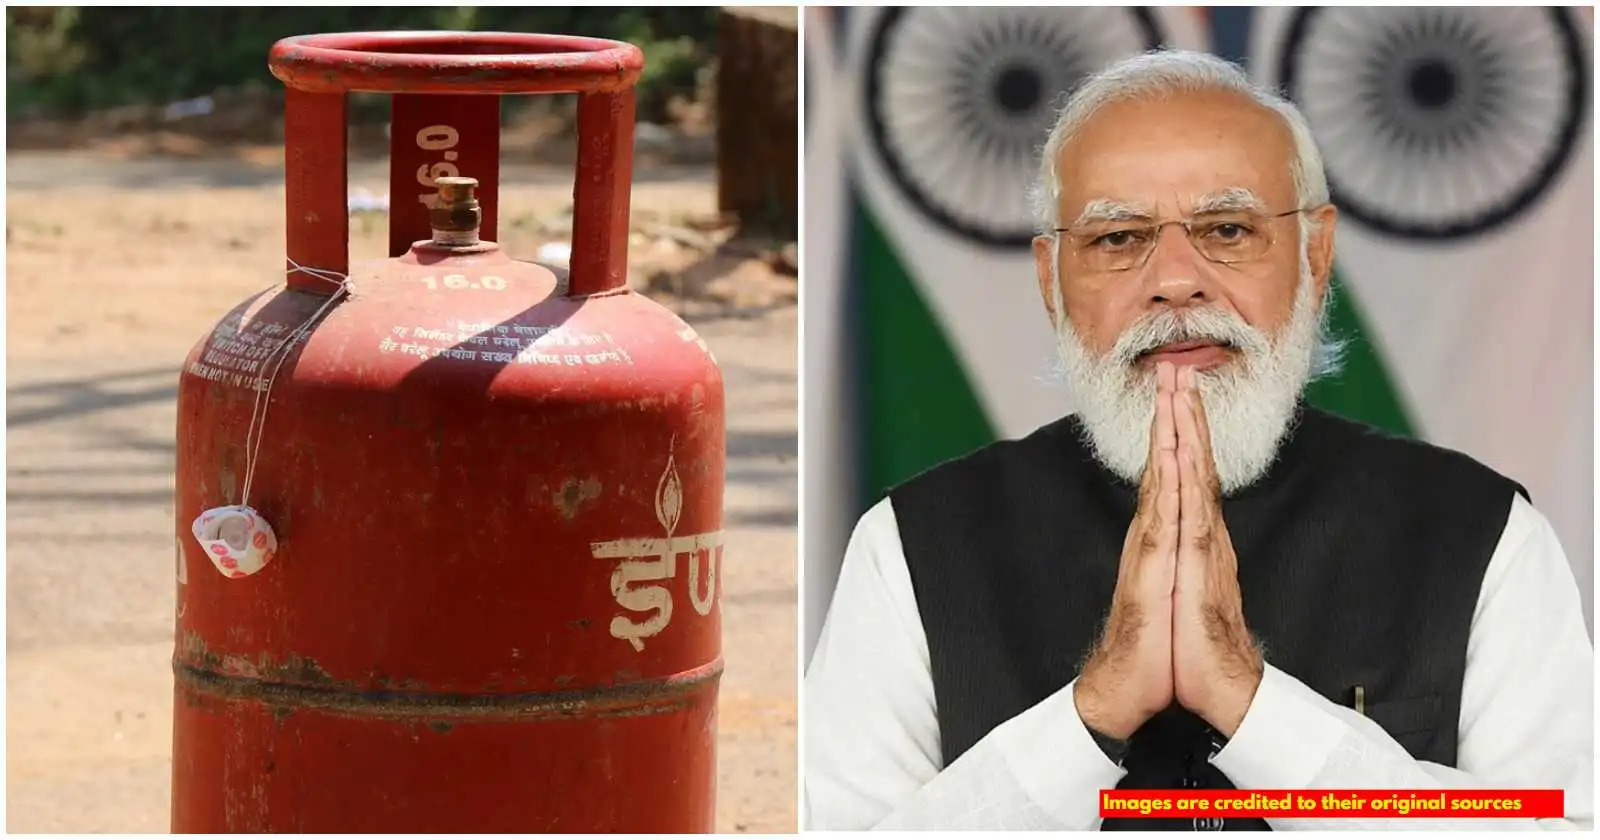 here is the more details about new Gas Cylinder Price and Subsidy provided by the government